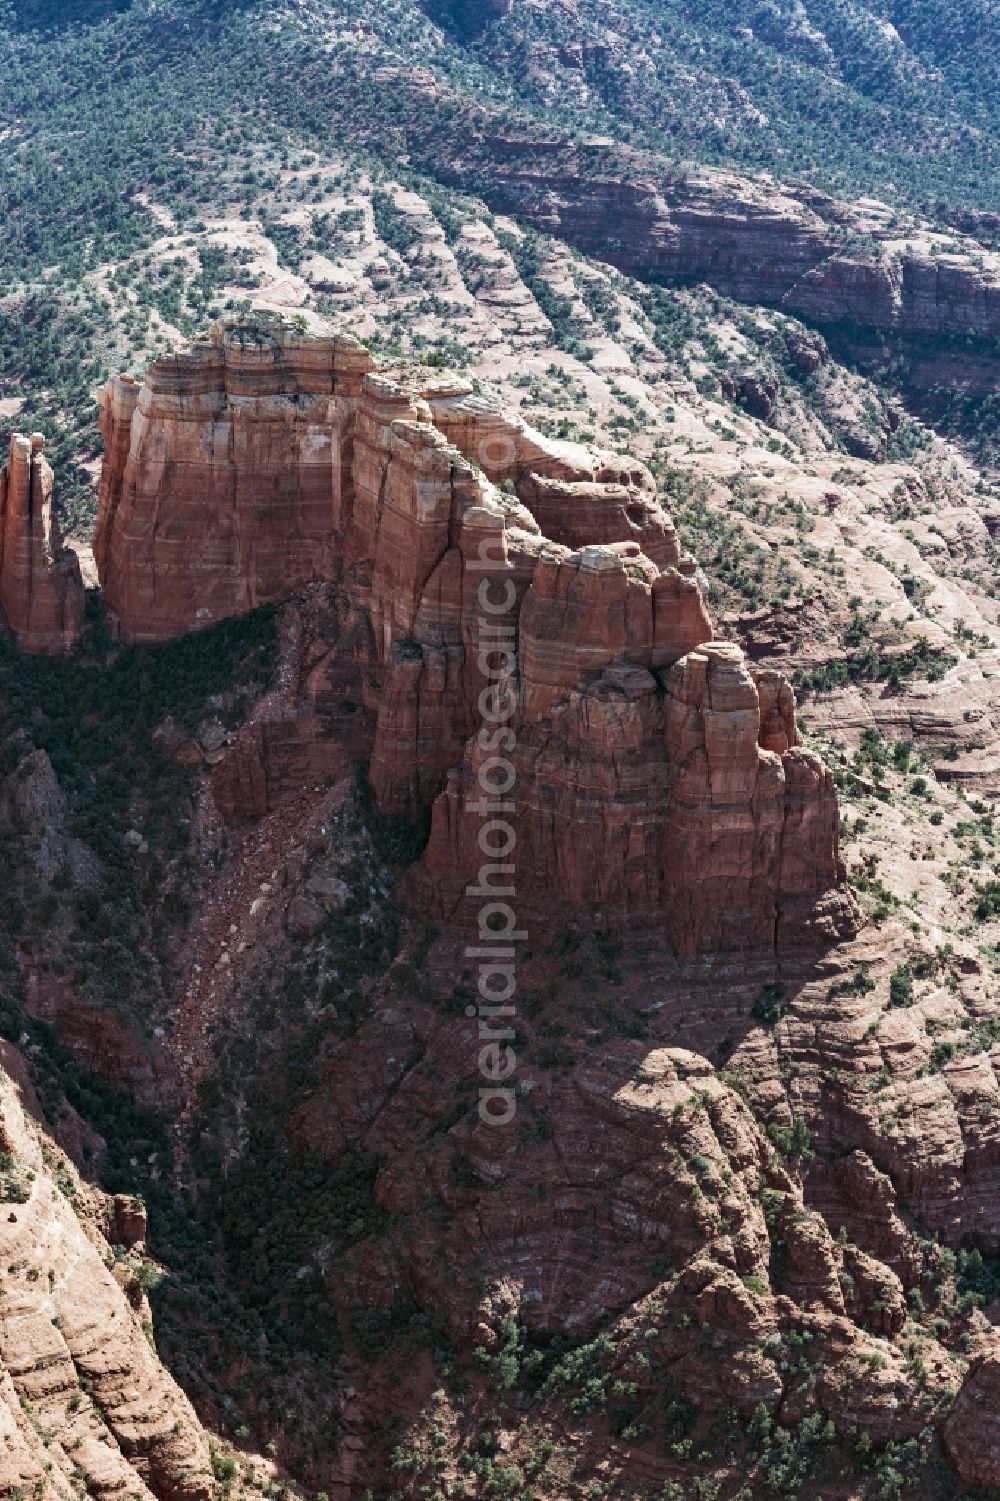 Sedona from above - Rock and mountain landscape in Sedona in Arizona, United States of America